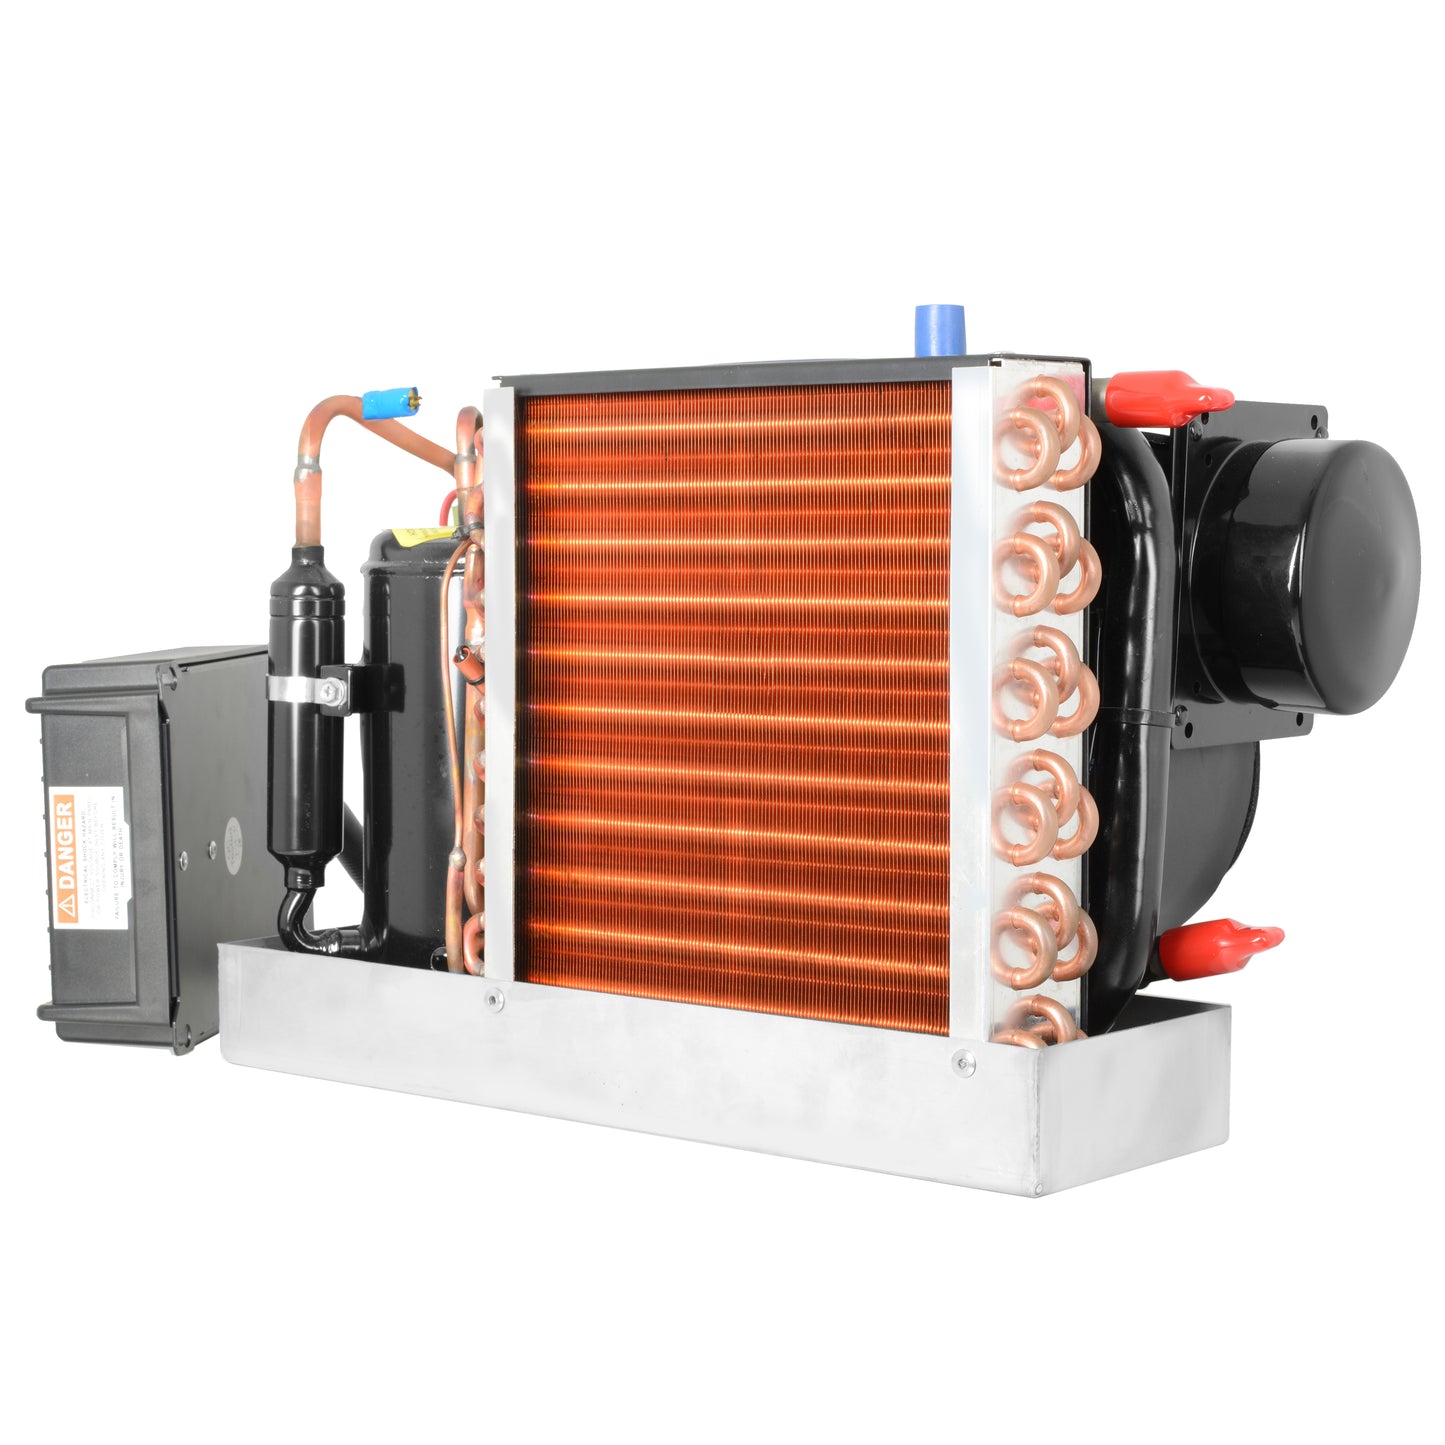 SELF-CONTAINED 7000 BTU 230V 50/60HZ MARINE AIR CONDITIONER COPPER FIN (HEATING AND COOLING) by MABRU